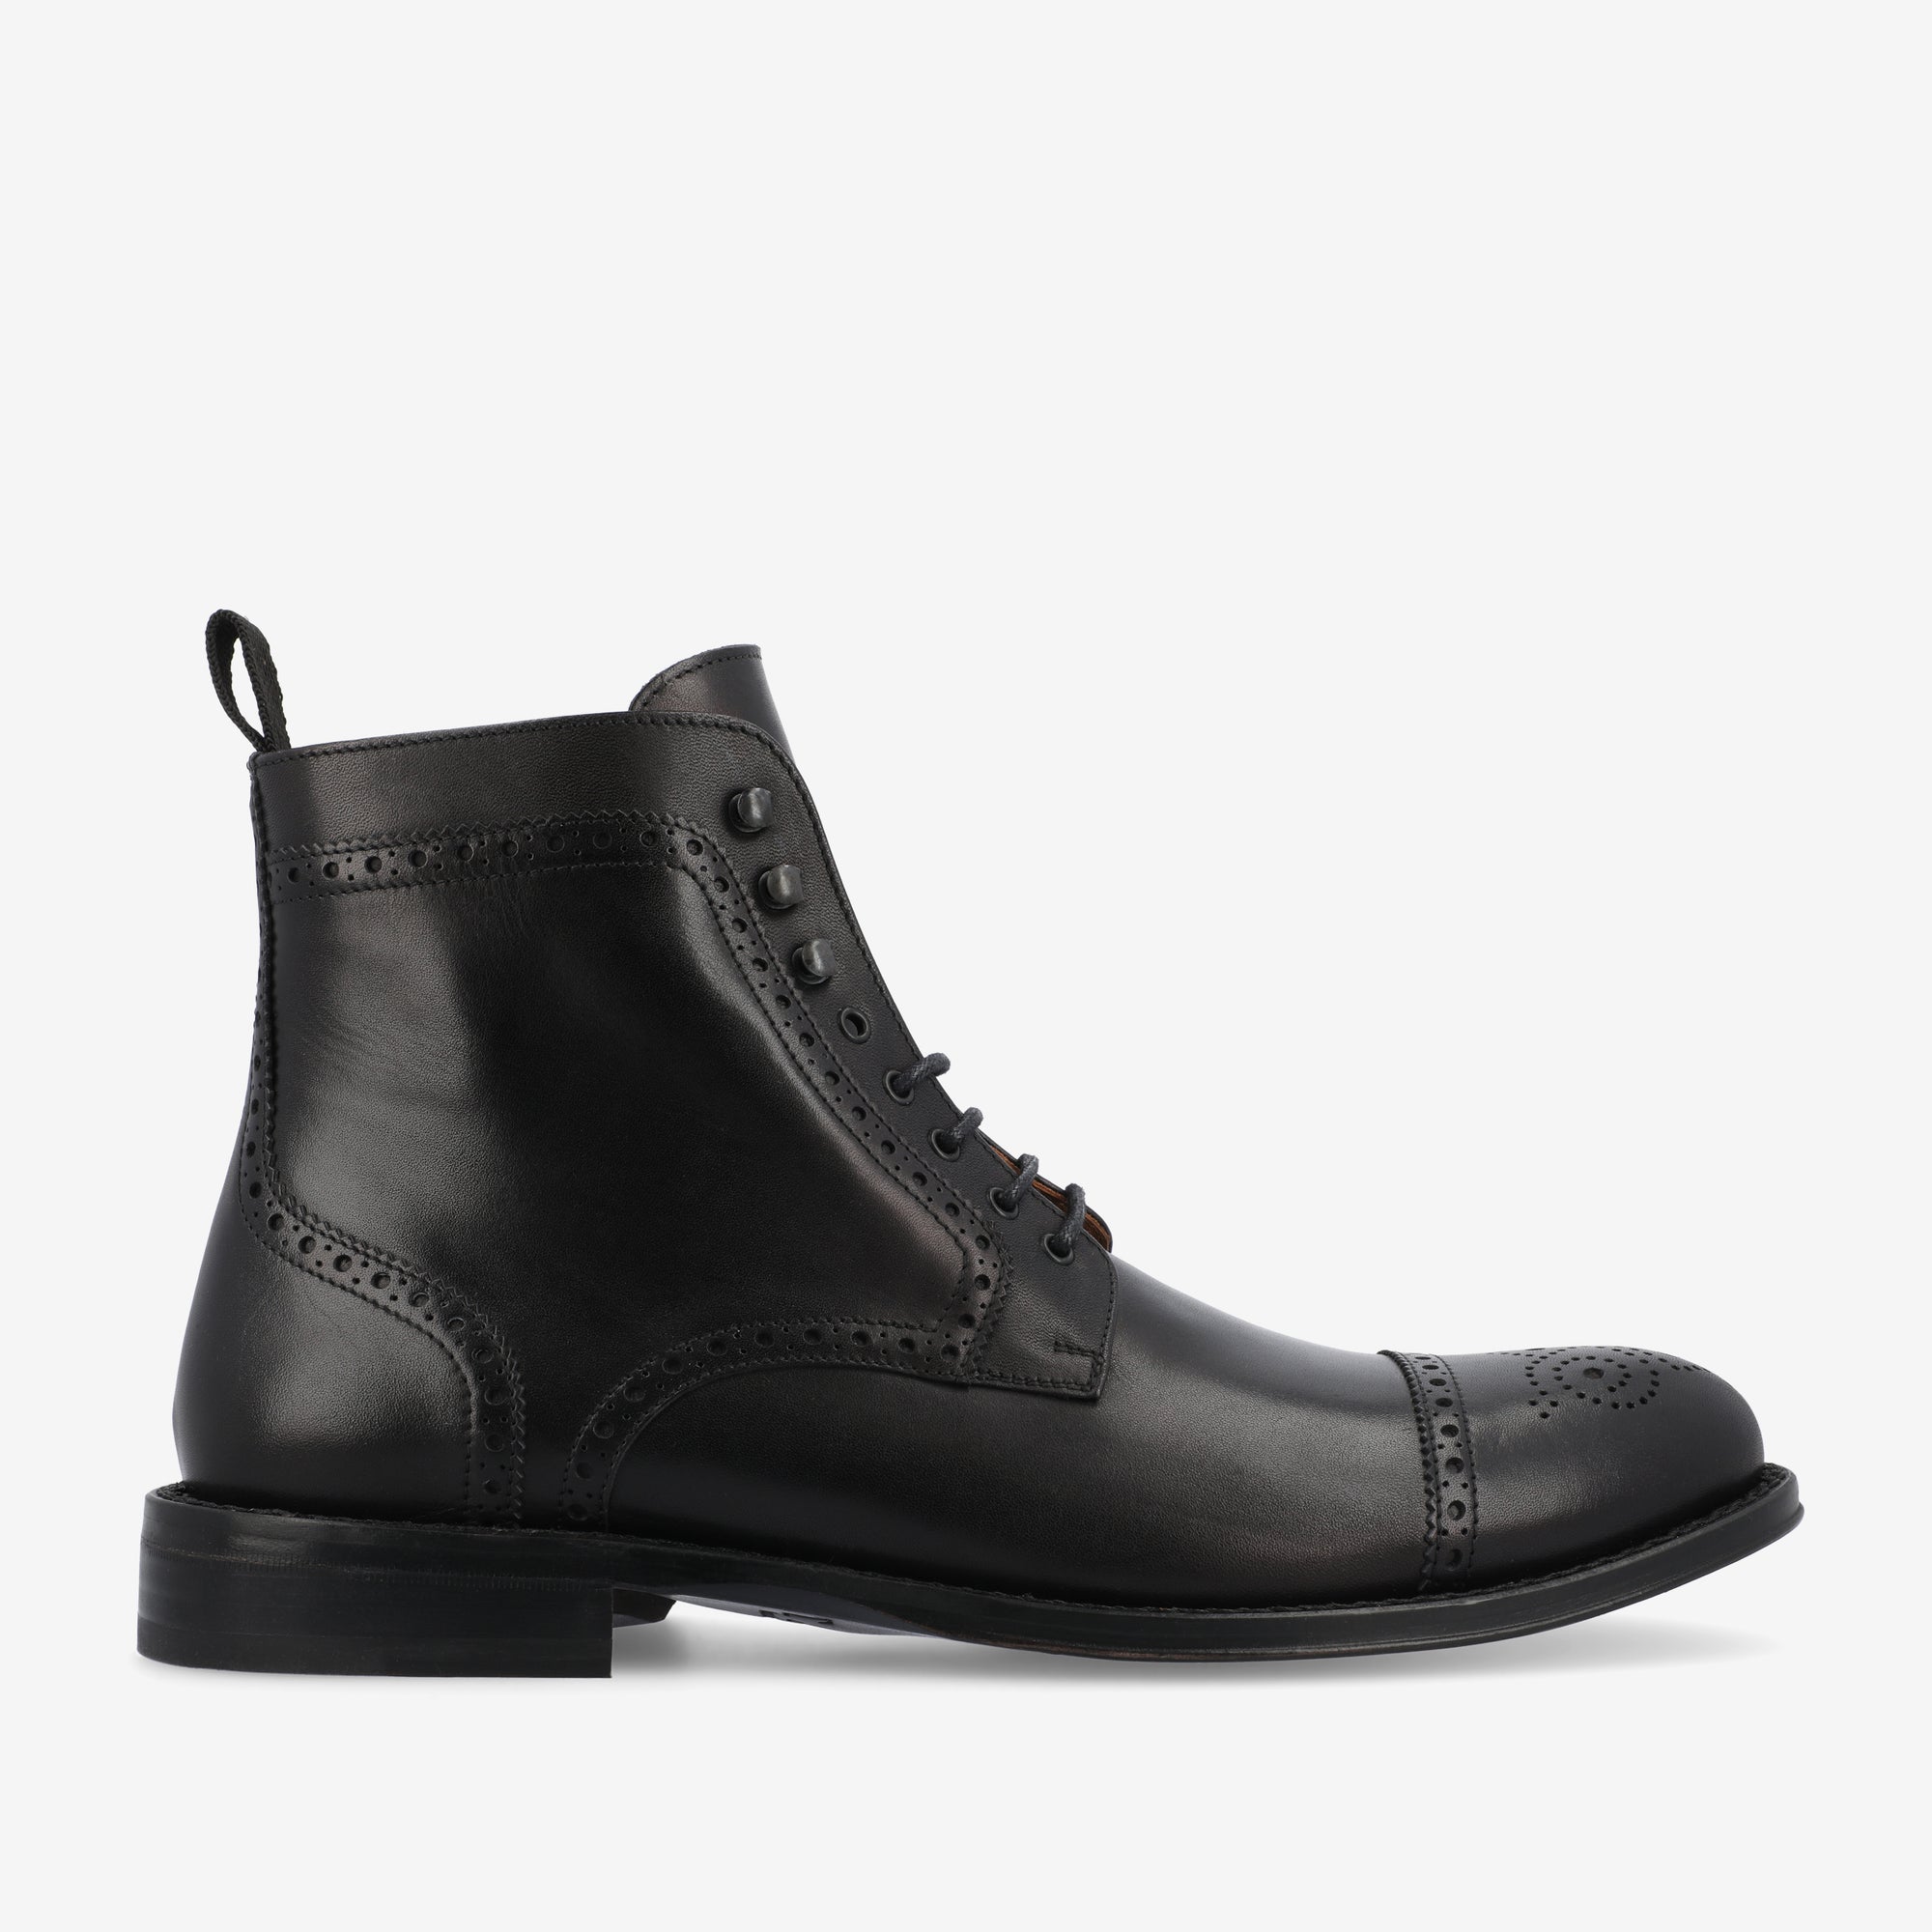 The Noah Boot in Black